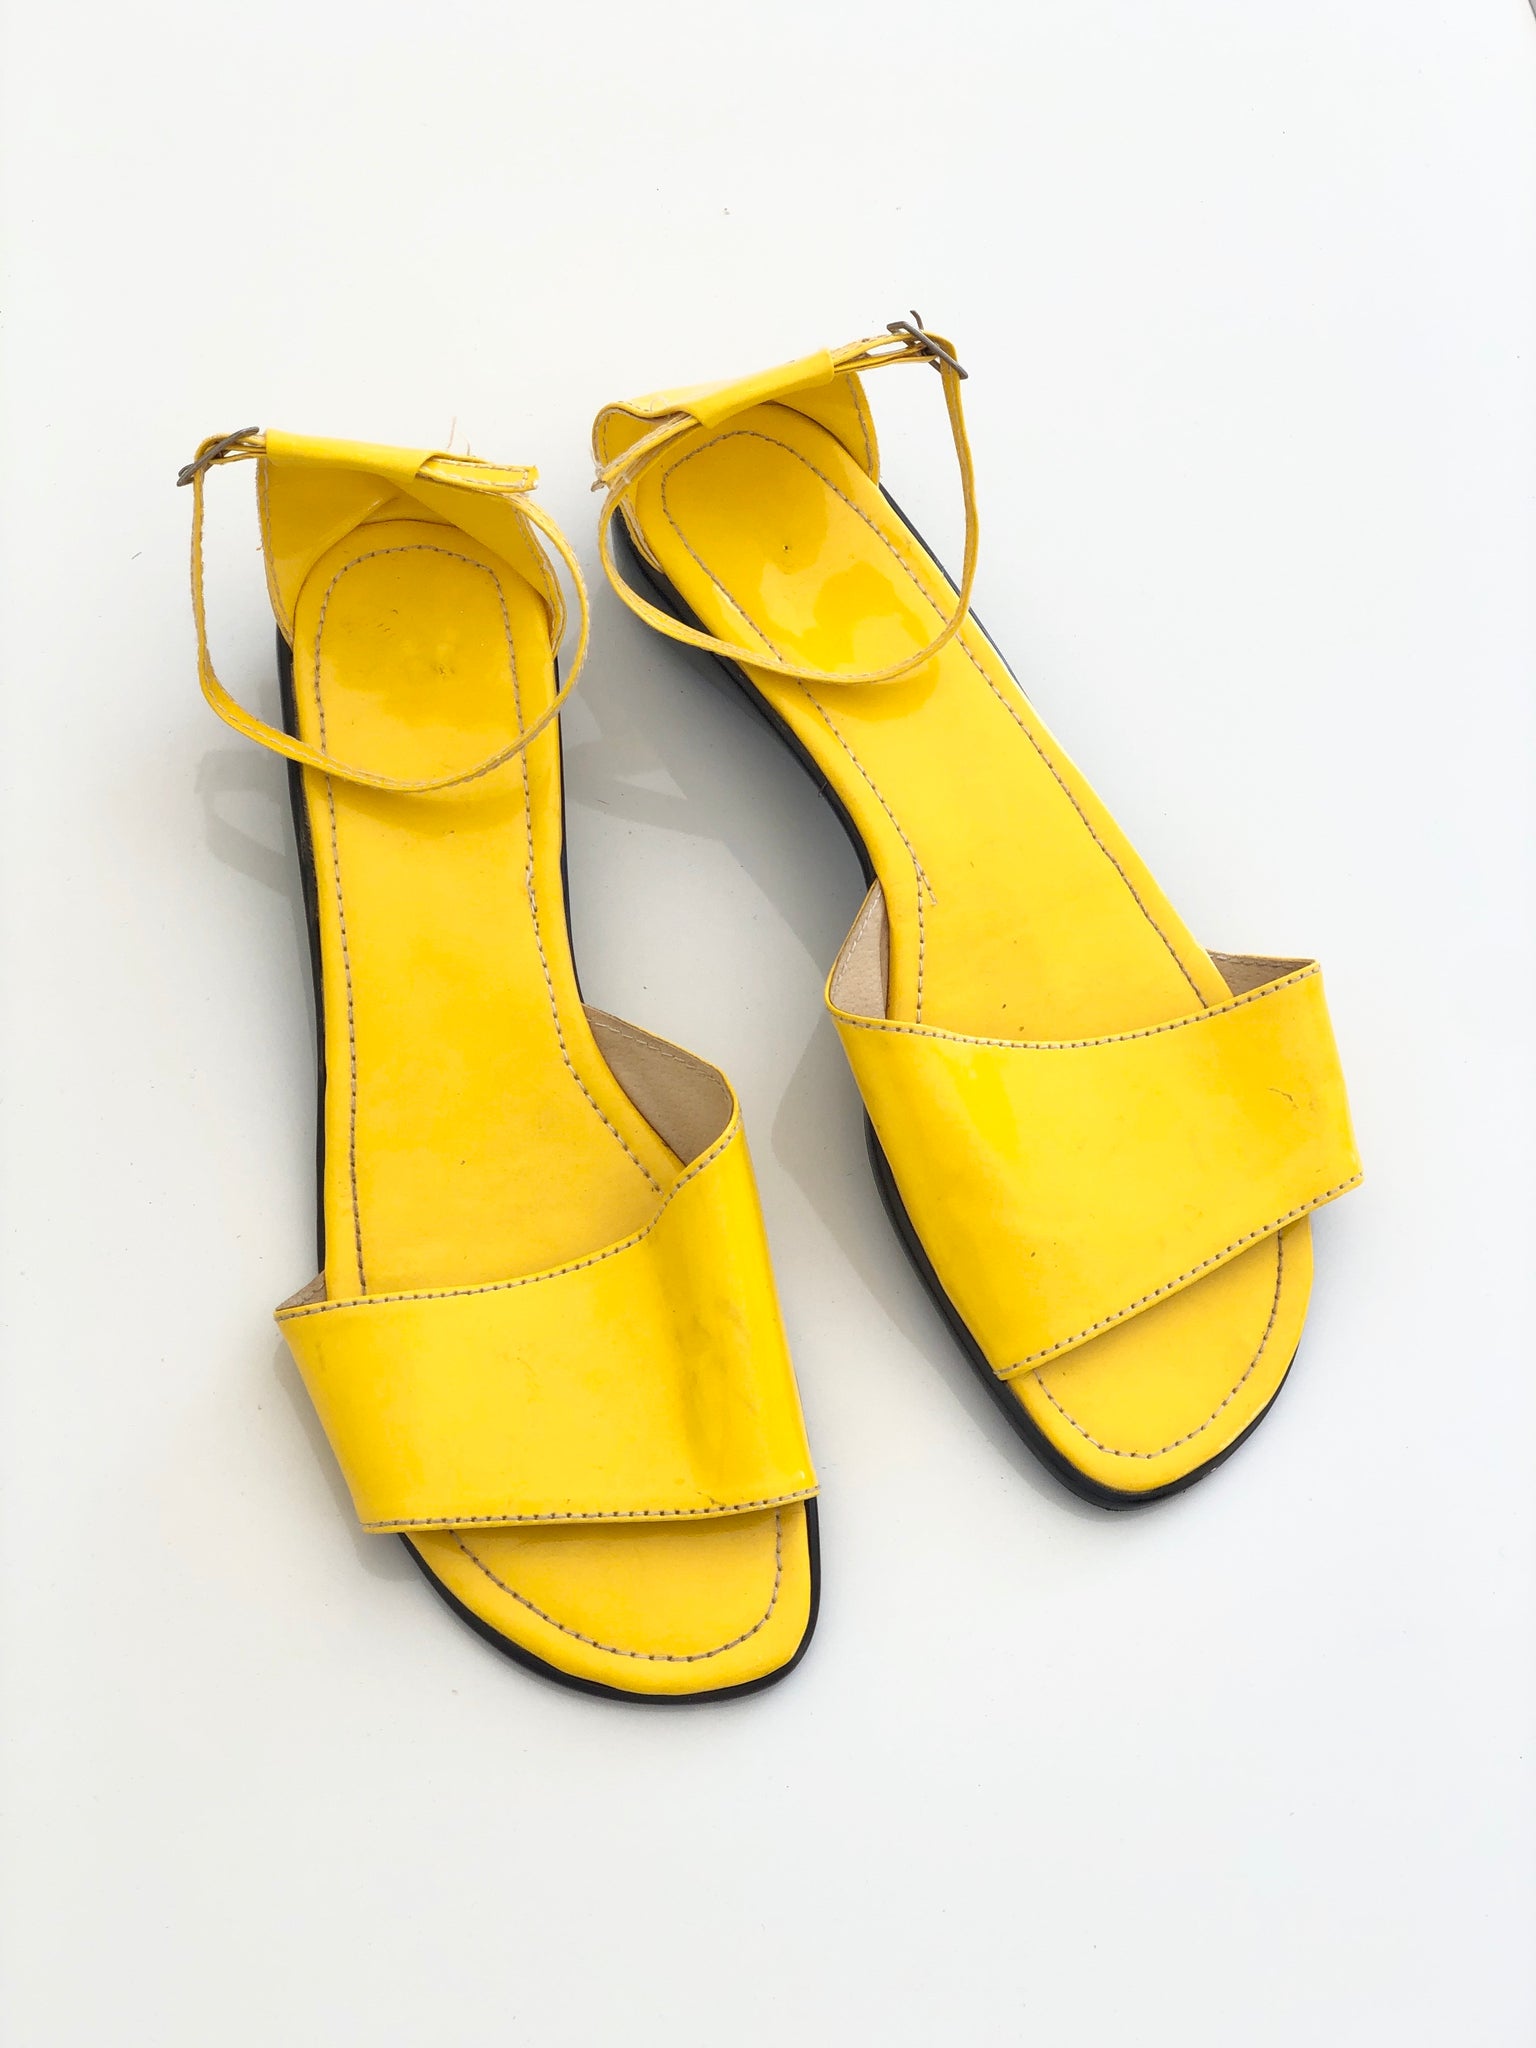 VINTAGE: Yellow Patent Leather Sandals